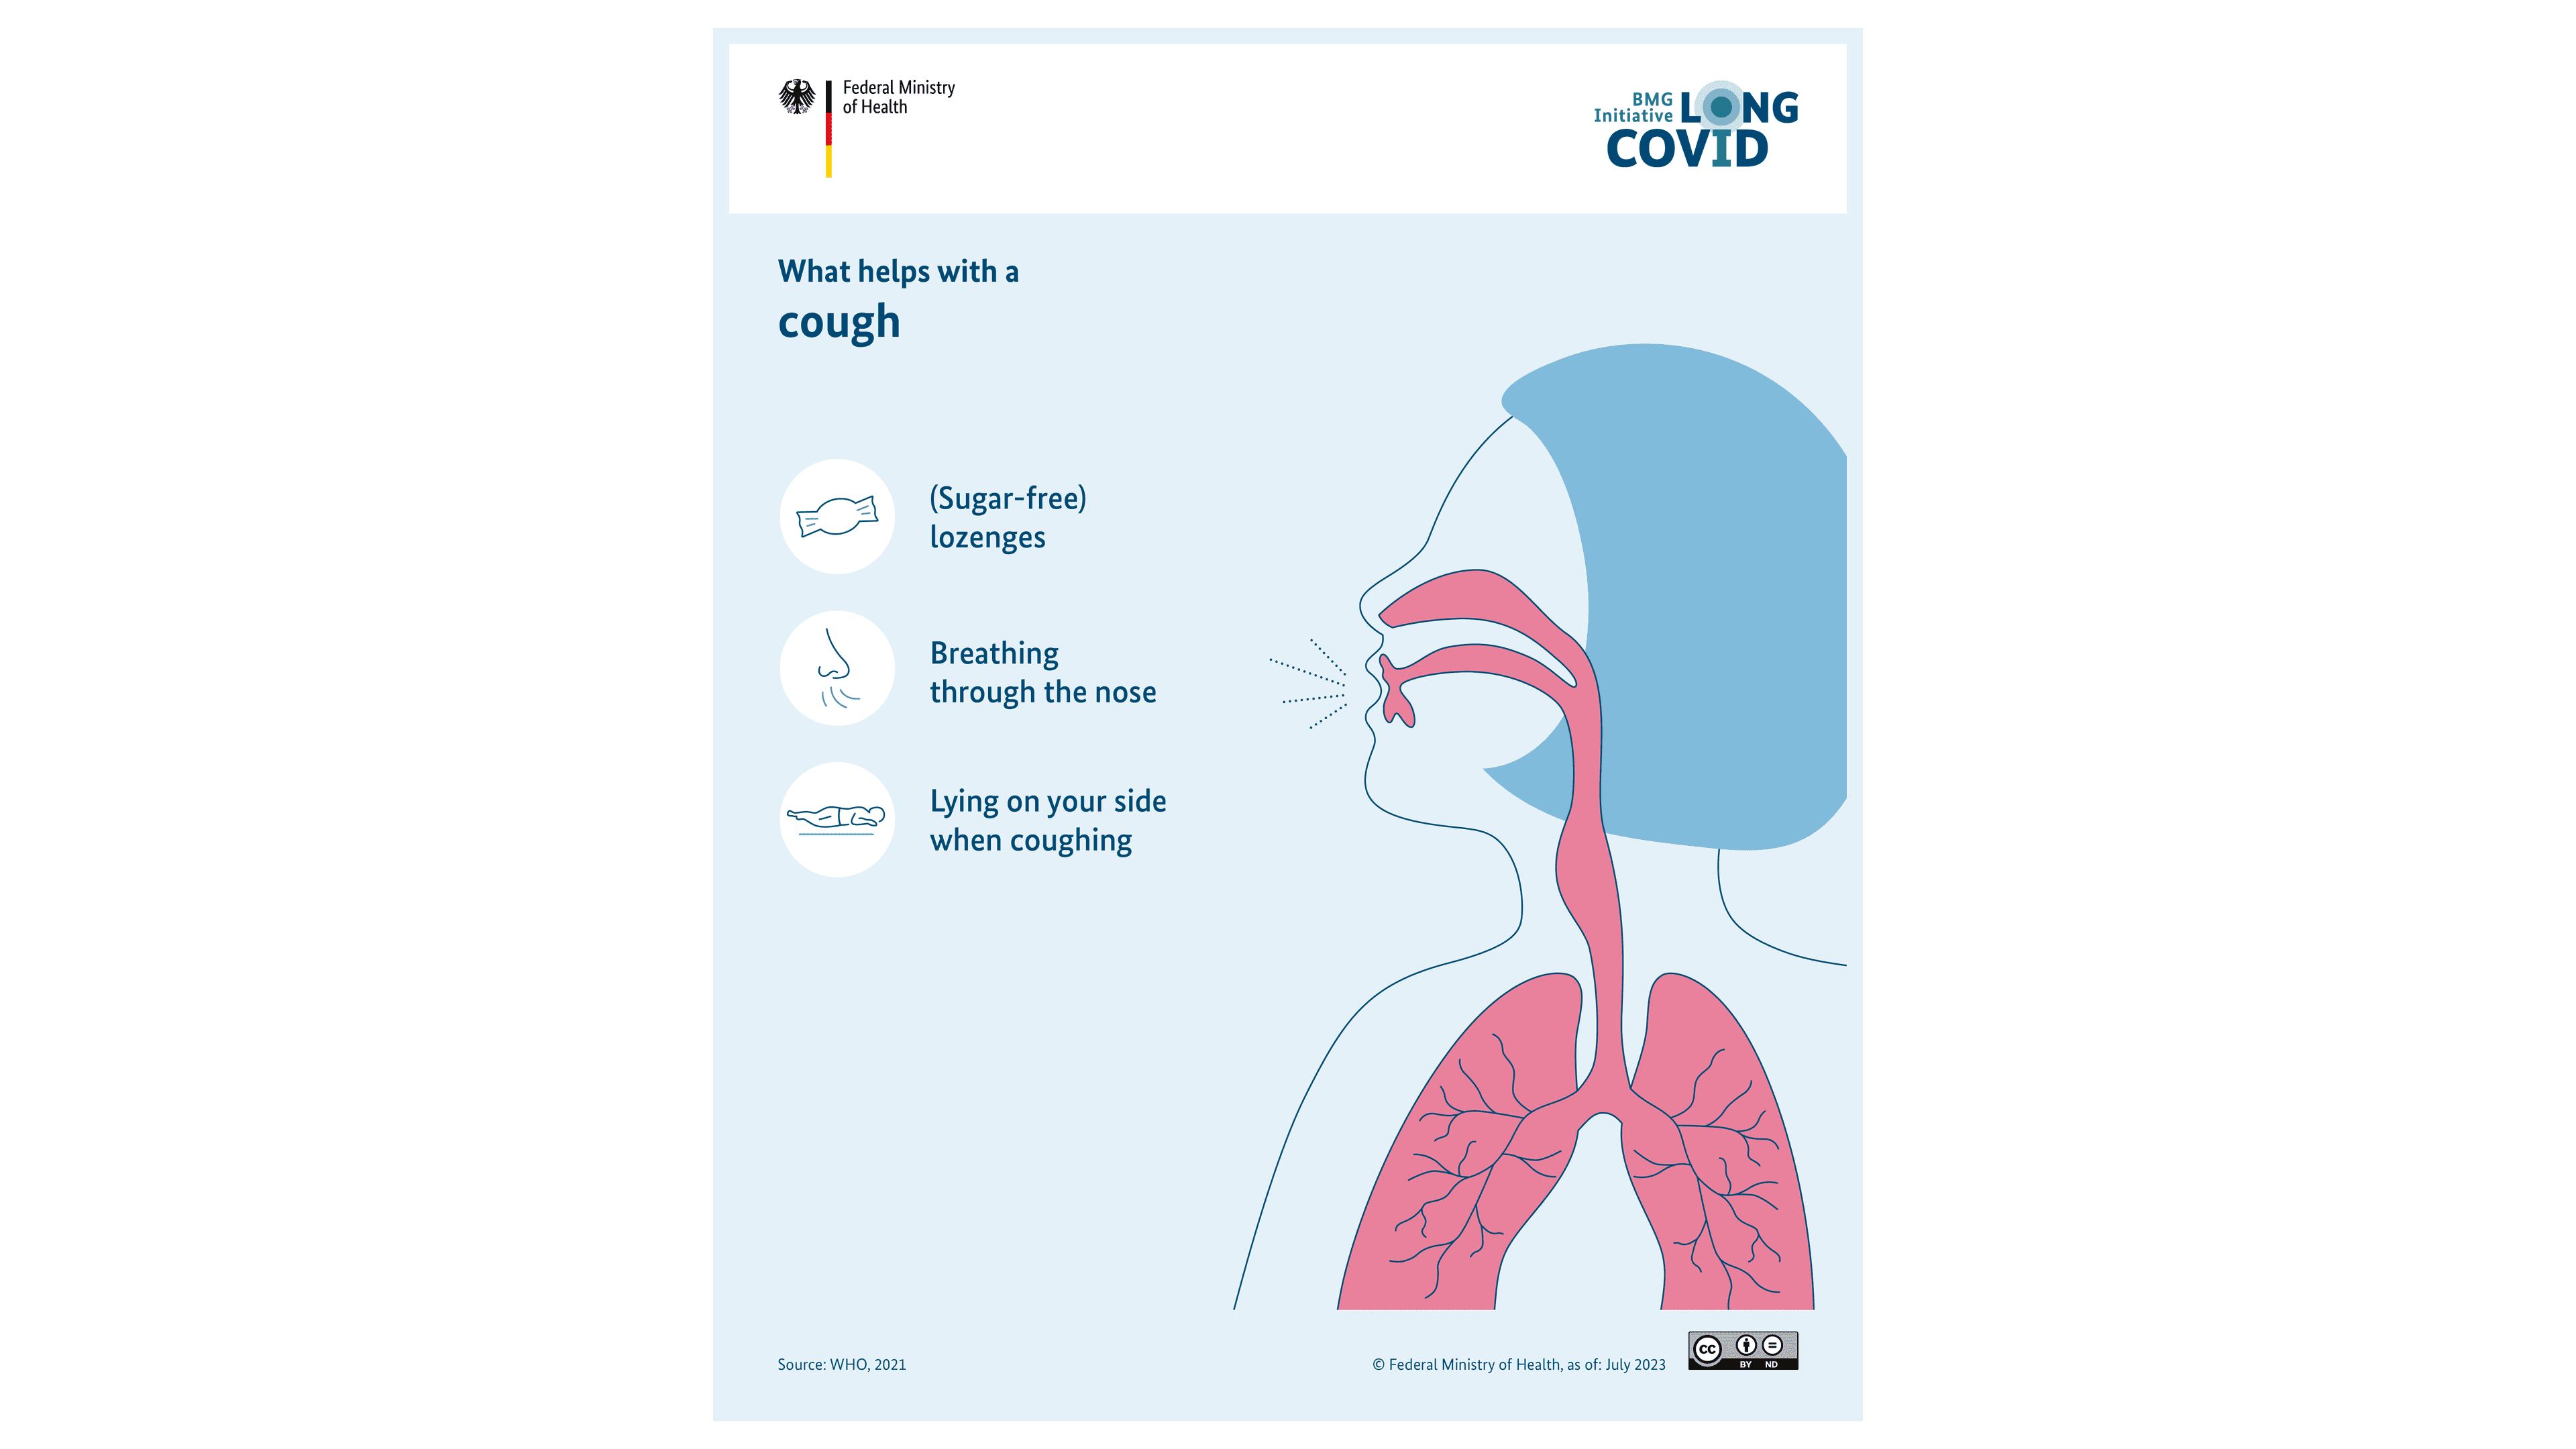 Diagram: Tips on dealing with cough, human body is shown in cross section with respiratory tract